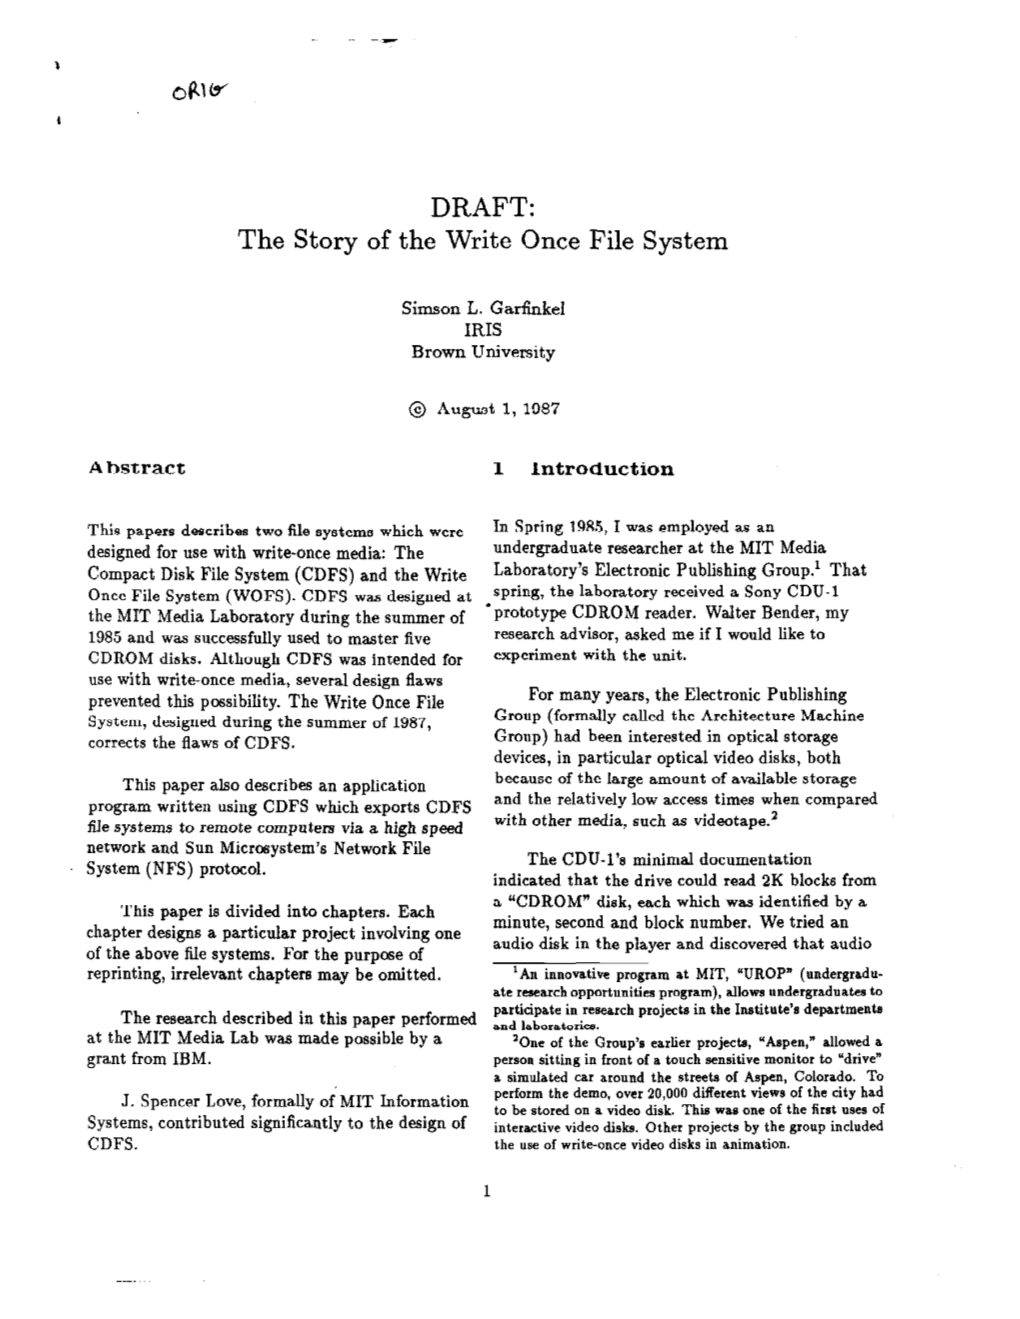 The Story of the Write Once File System